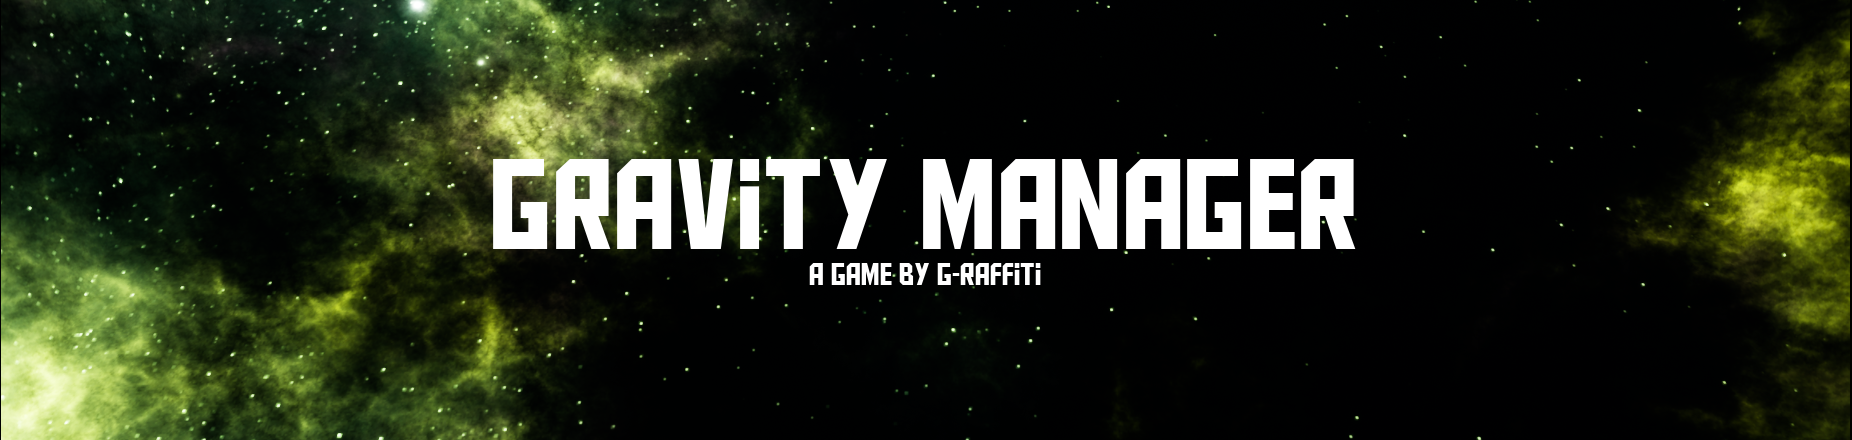 Gravity Manager